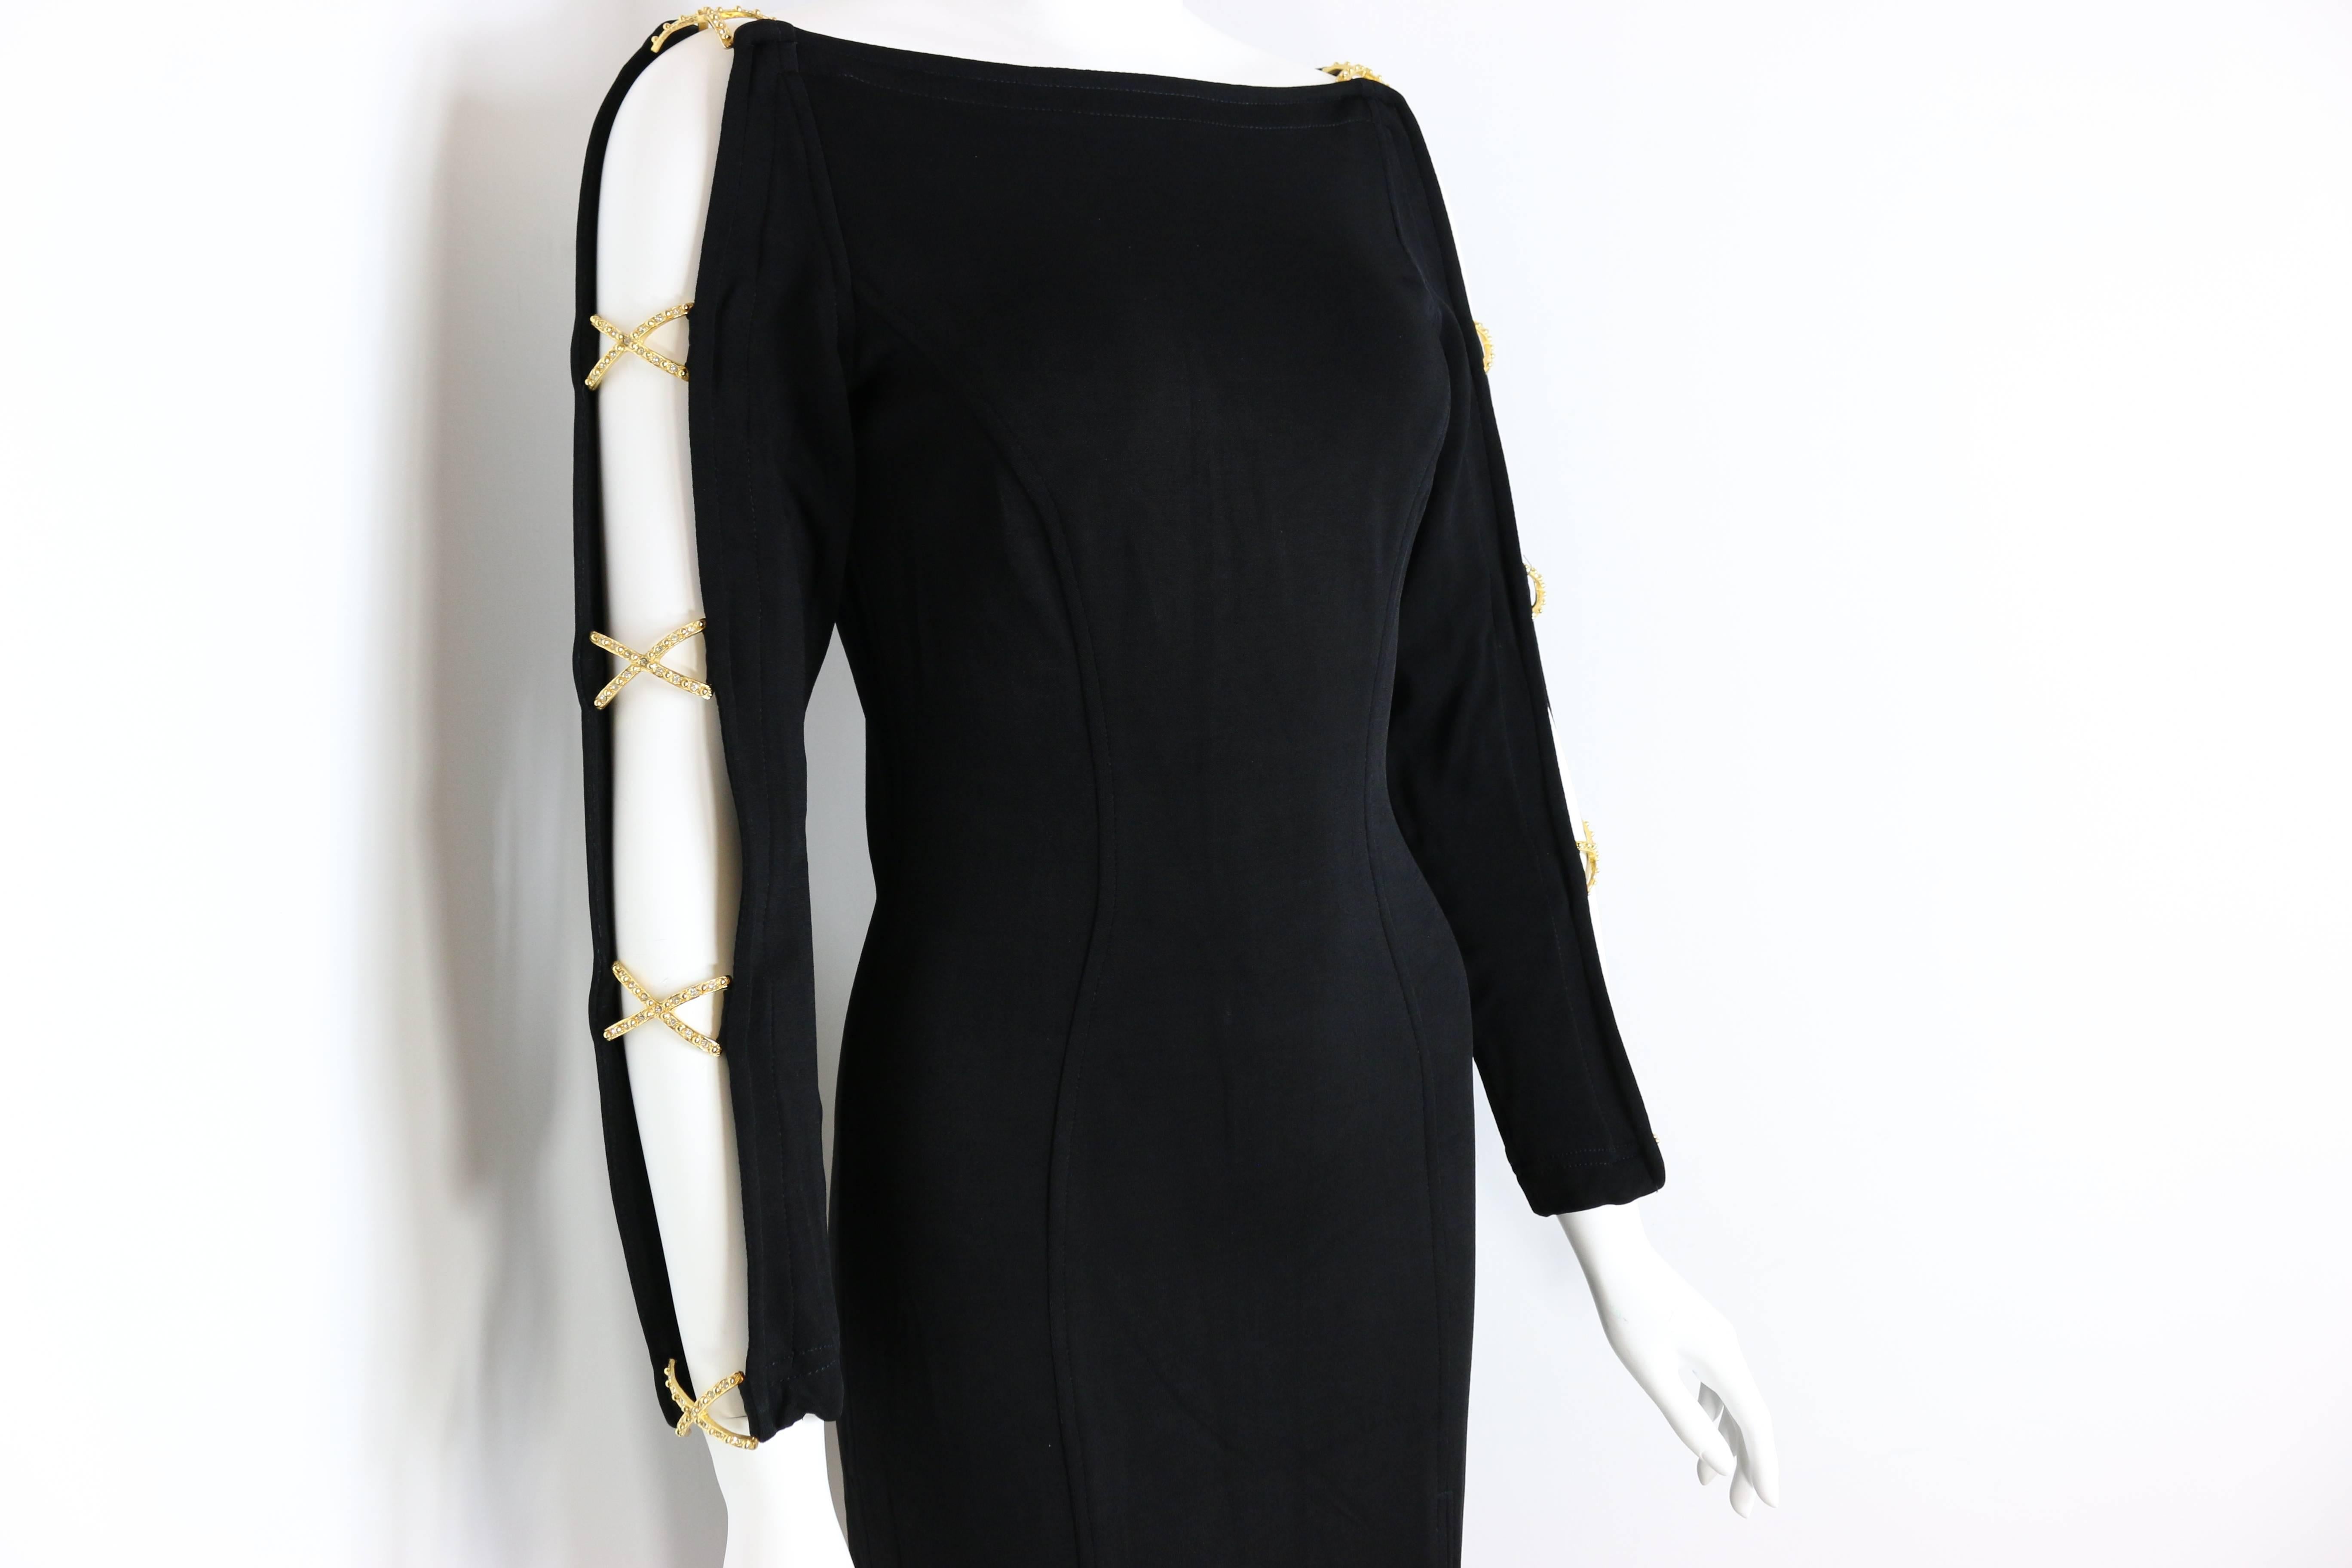 - Vintage 80s Tadashi black jersey dress. 

- Featuring open sleeves design with ten gold rhinestones cross. 

- Split on the front. 

- Back zipper fastening. 

- 82% Rayon, 10% Nylon, 8% Lycra. 

- Size Small. 